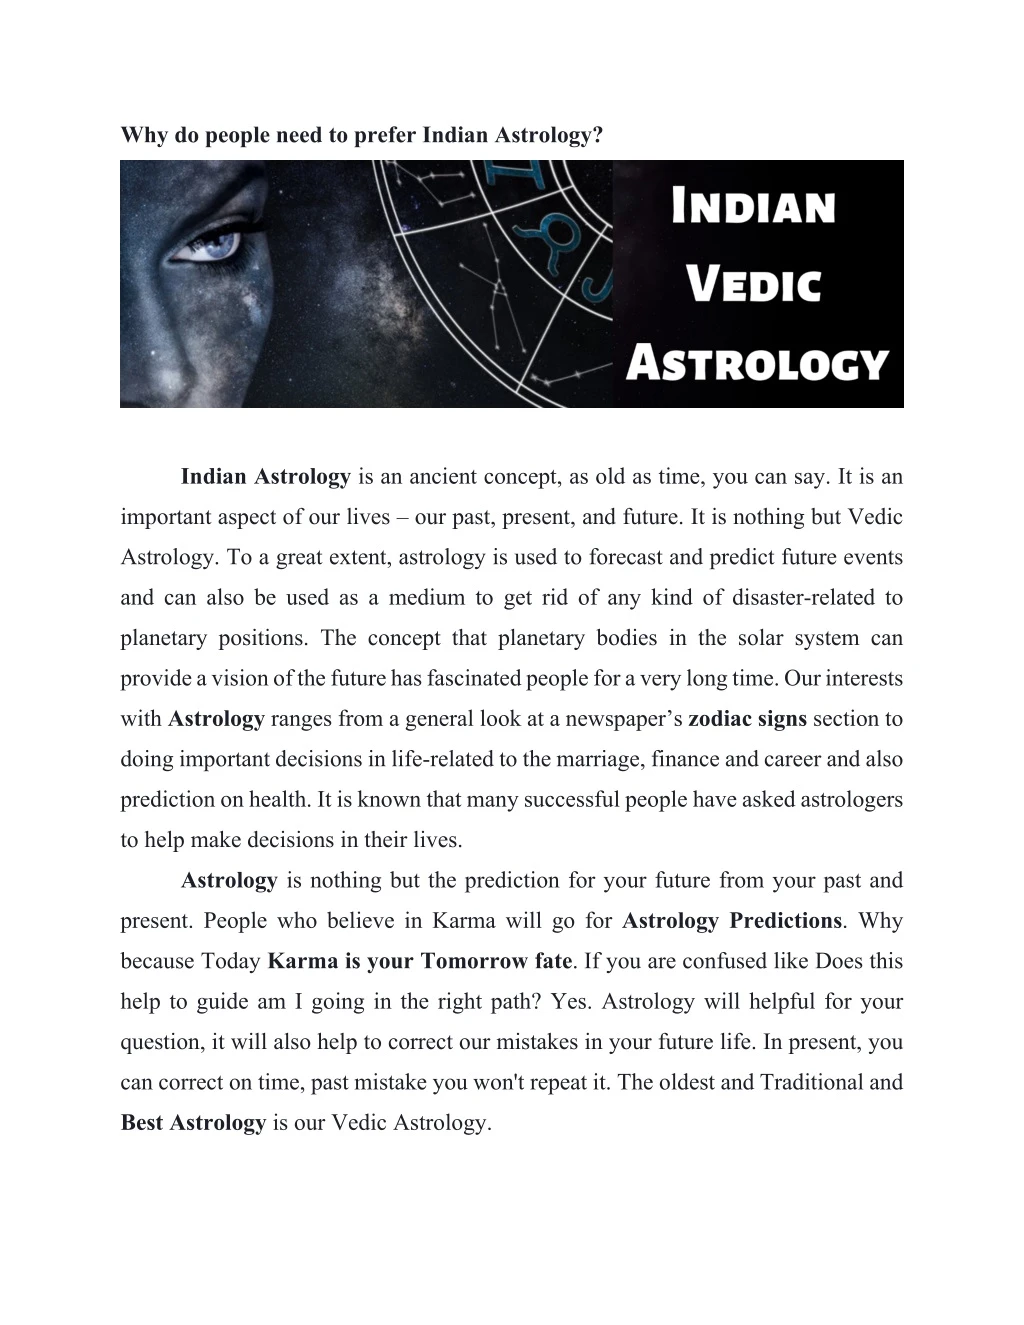 why do people need to prefer indian astrology